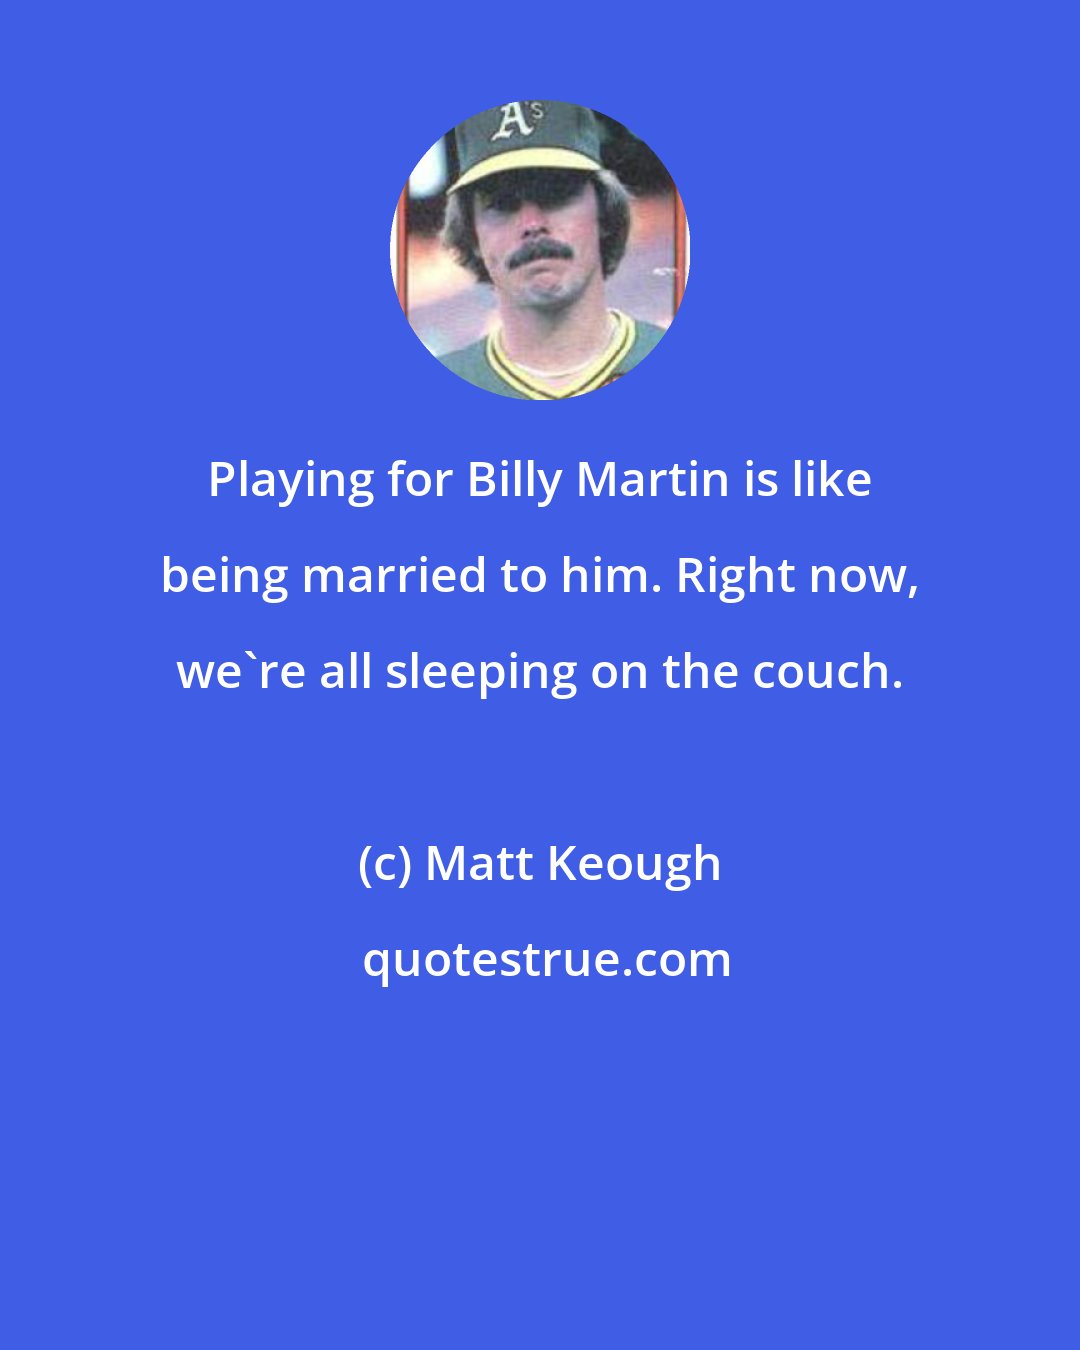 Matt Keough: Playing for Billy Martin is like being married to him. Right now, we're all sleeping on the couch.